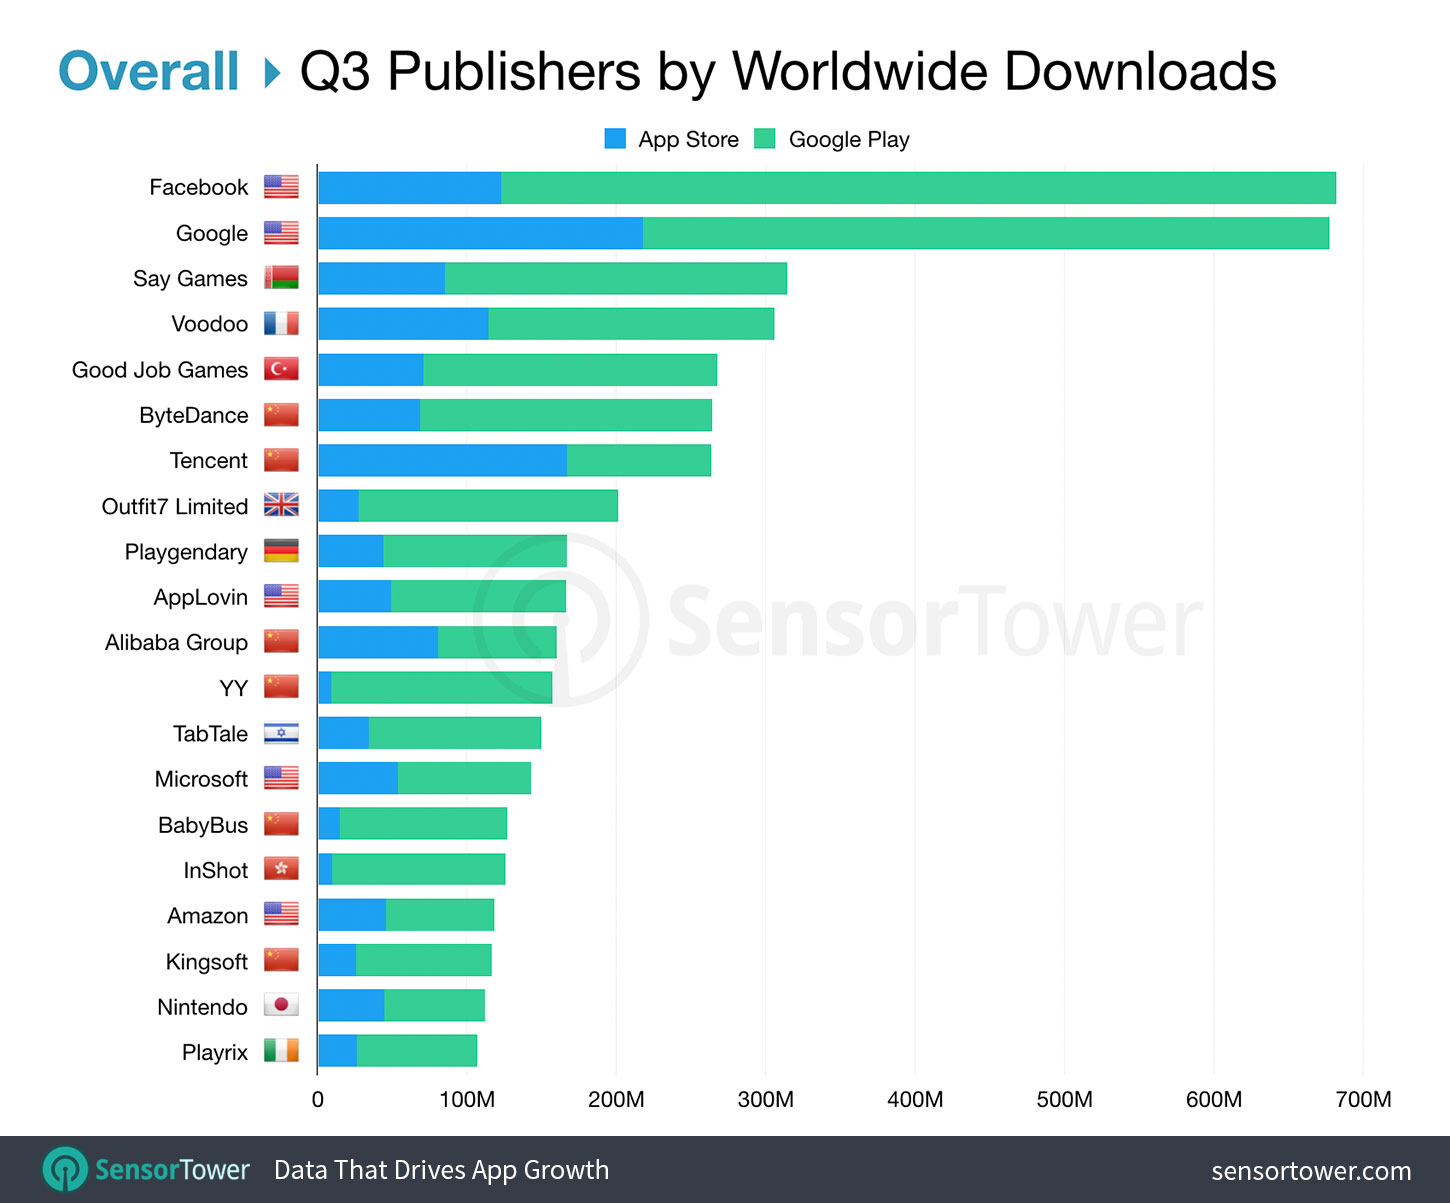 Top Mobile Publishers Worldwide Overall for Q3 2019